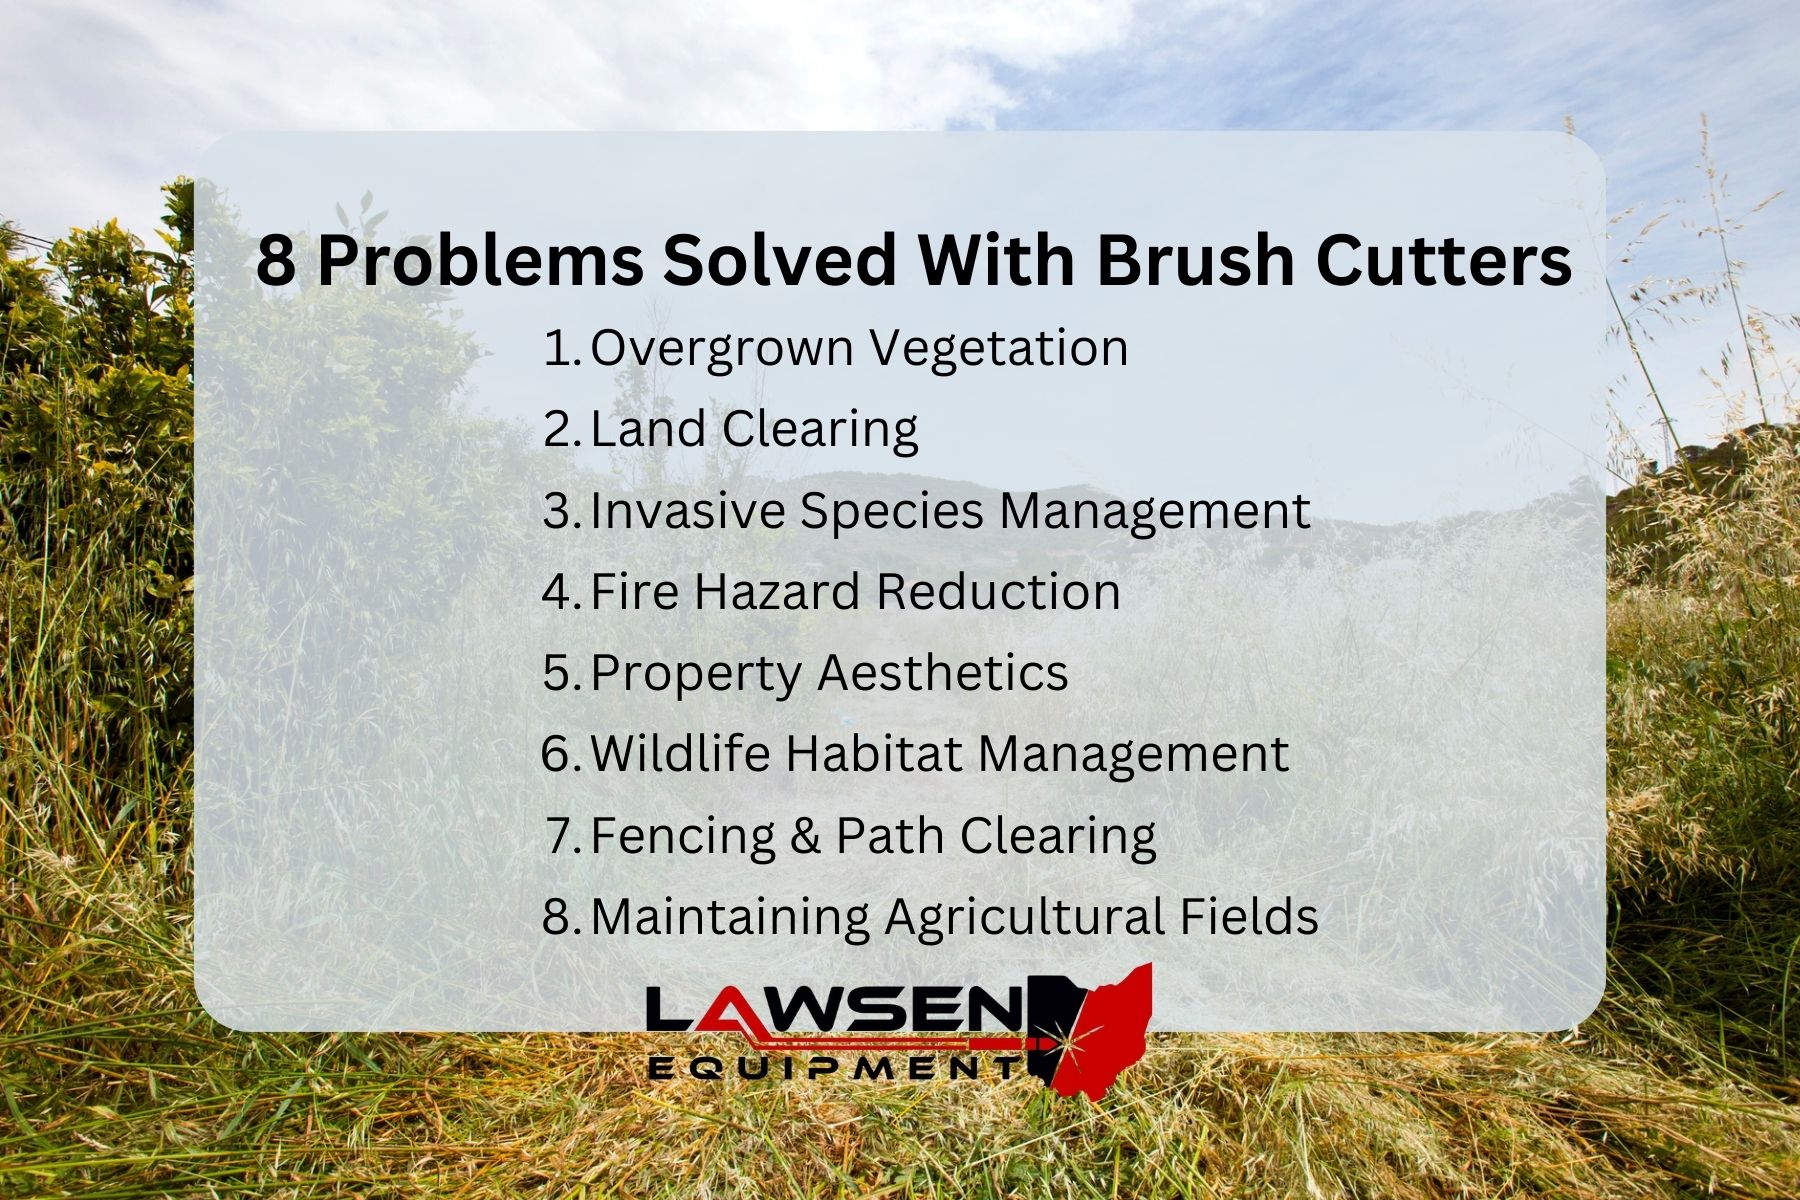 8 Problems Solved With Brush Cutters